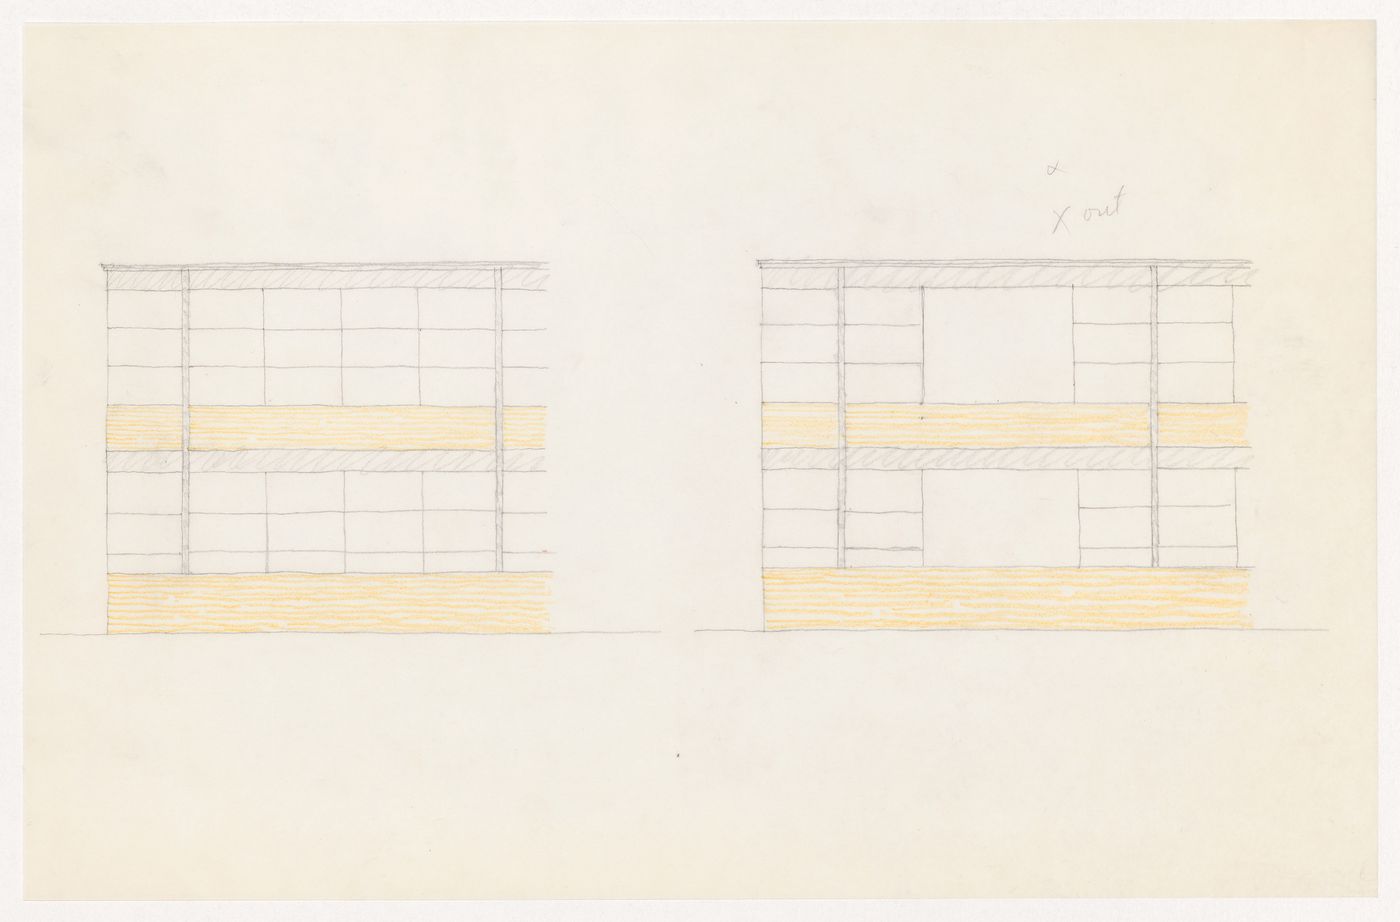 Partial sketch elevations for the Metallurgy Building, Illinois Institute of Technology, Chicago